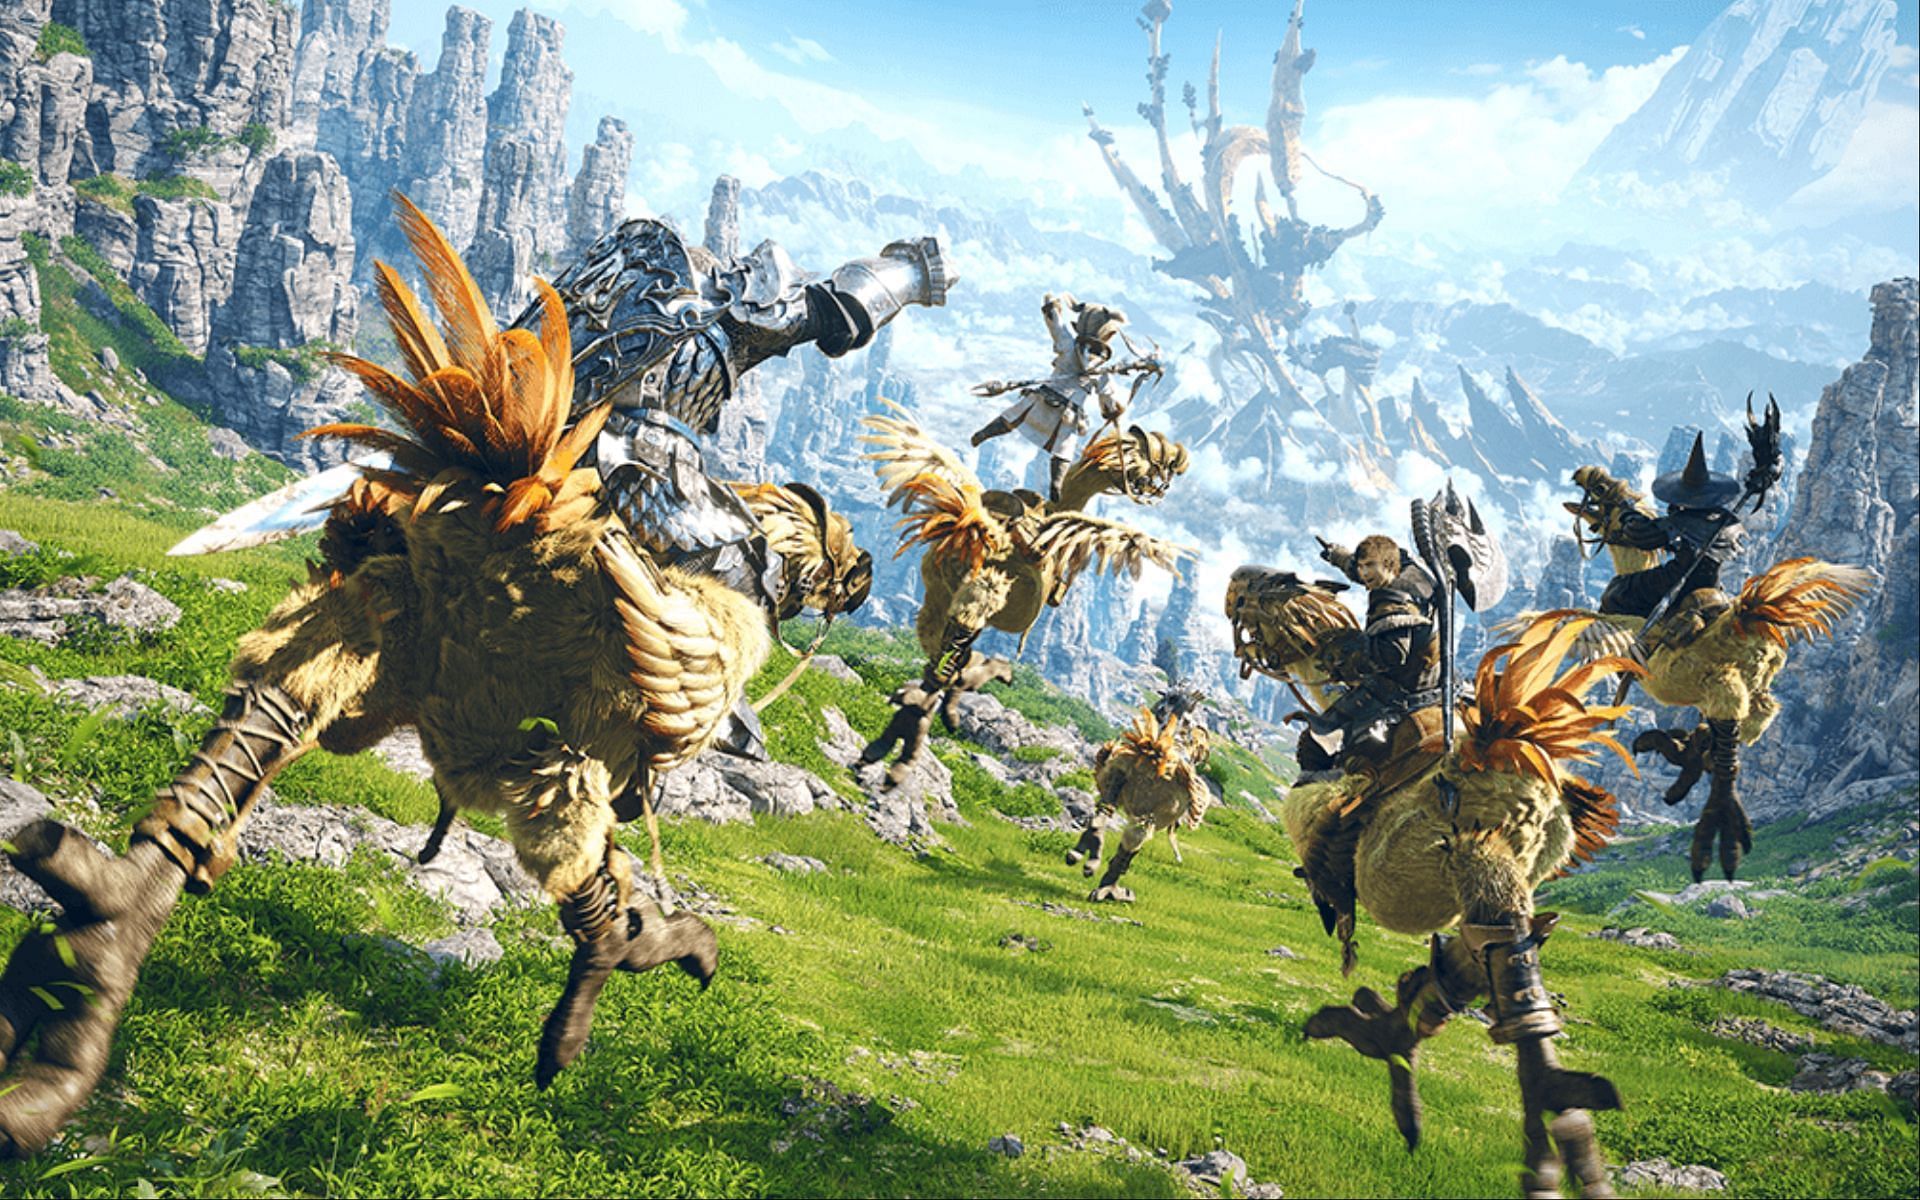 Is Final Fantasy XIV worth playing in 2023?